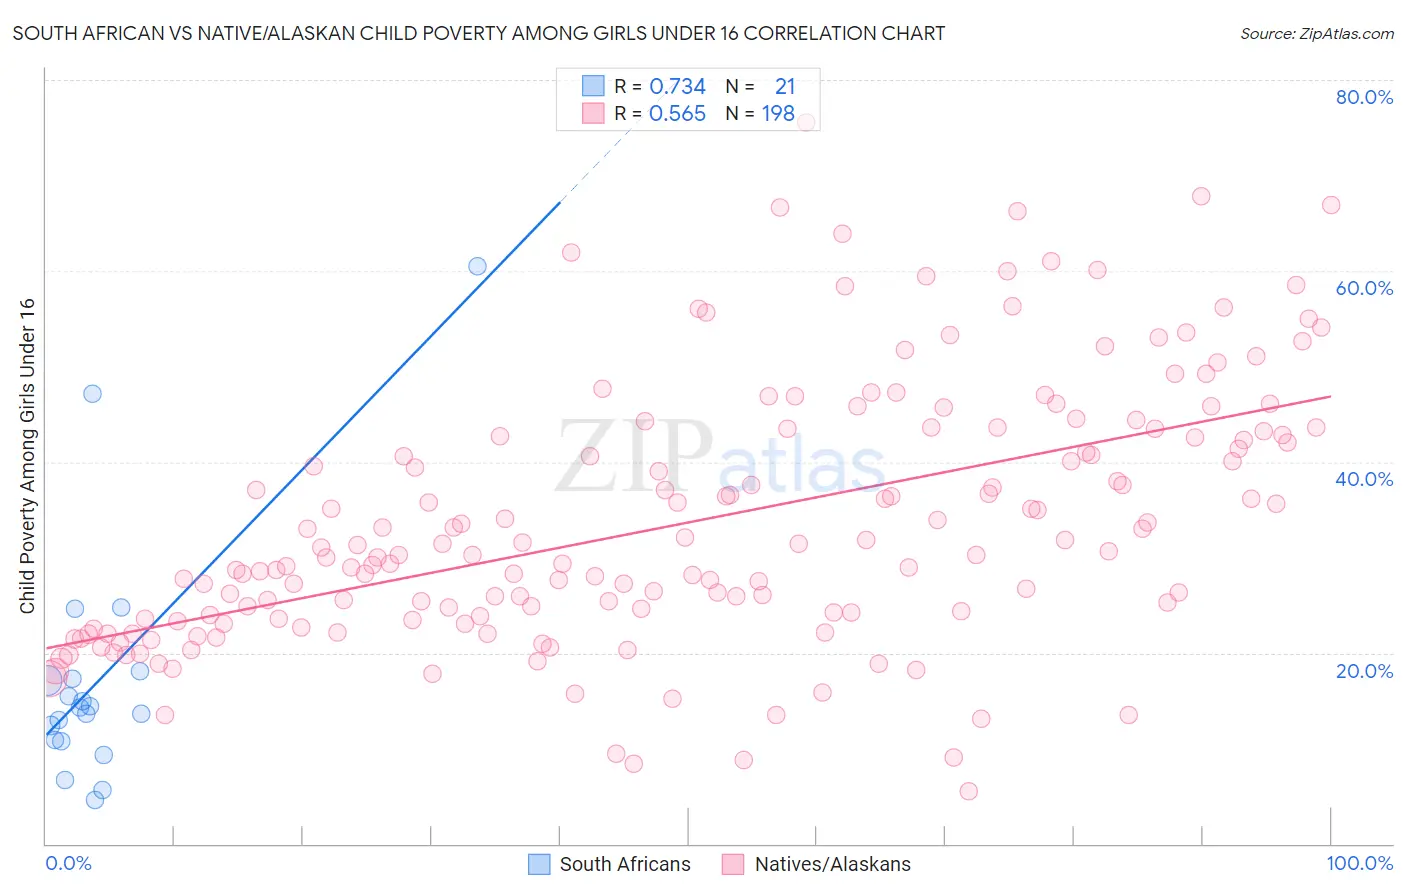 South African vs Native/Alaskan Child Poverty Among Girls Under 16